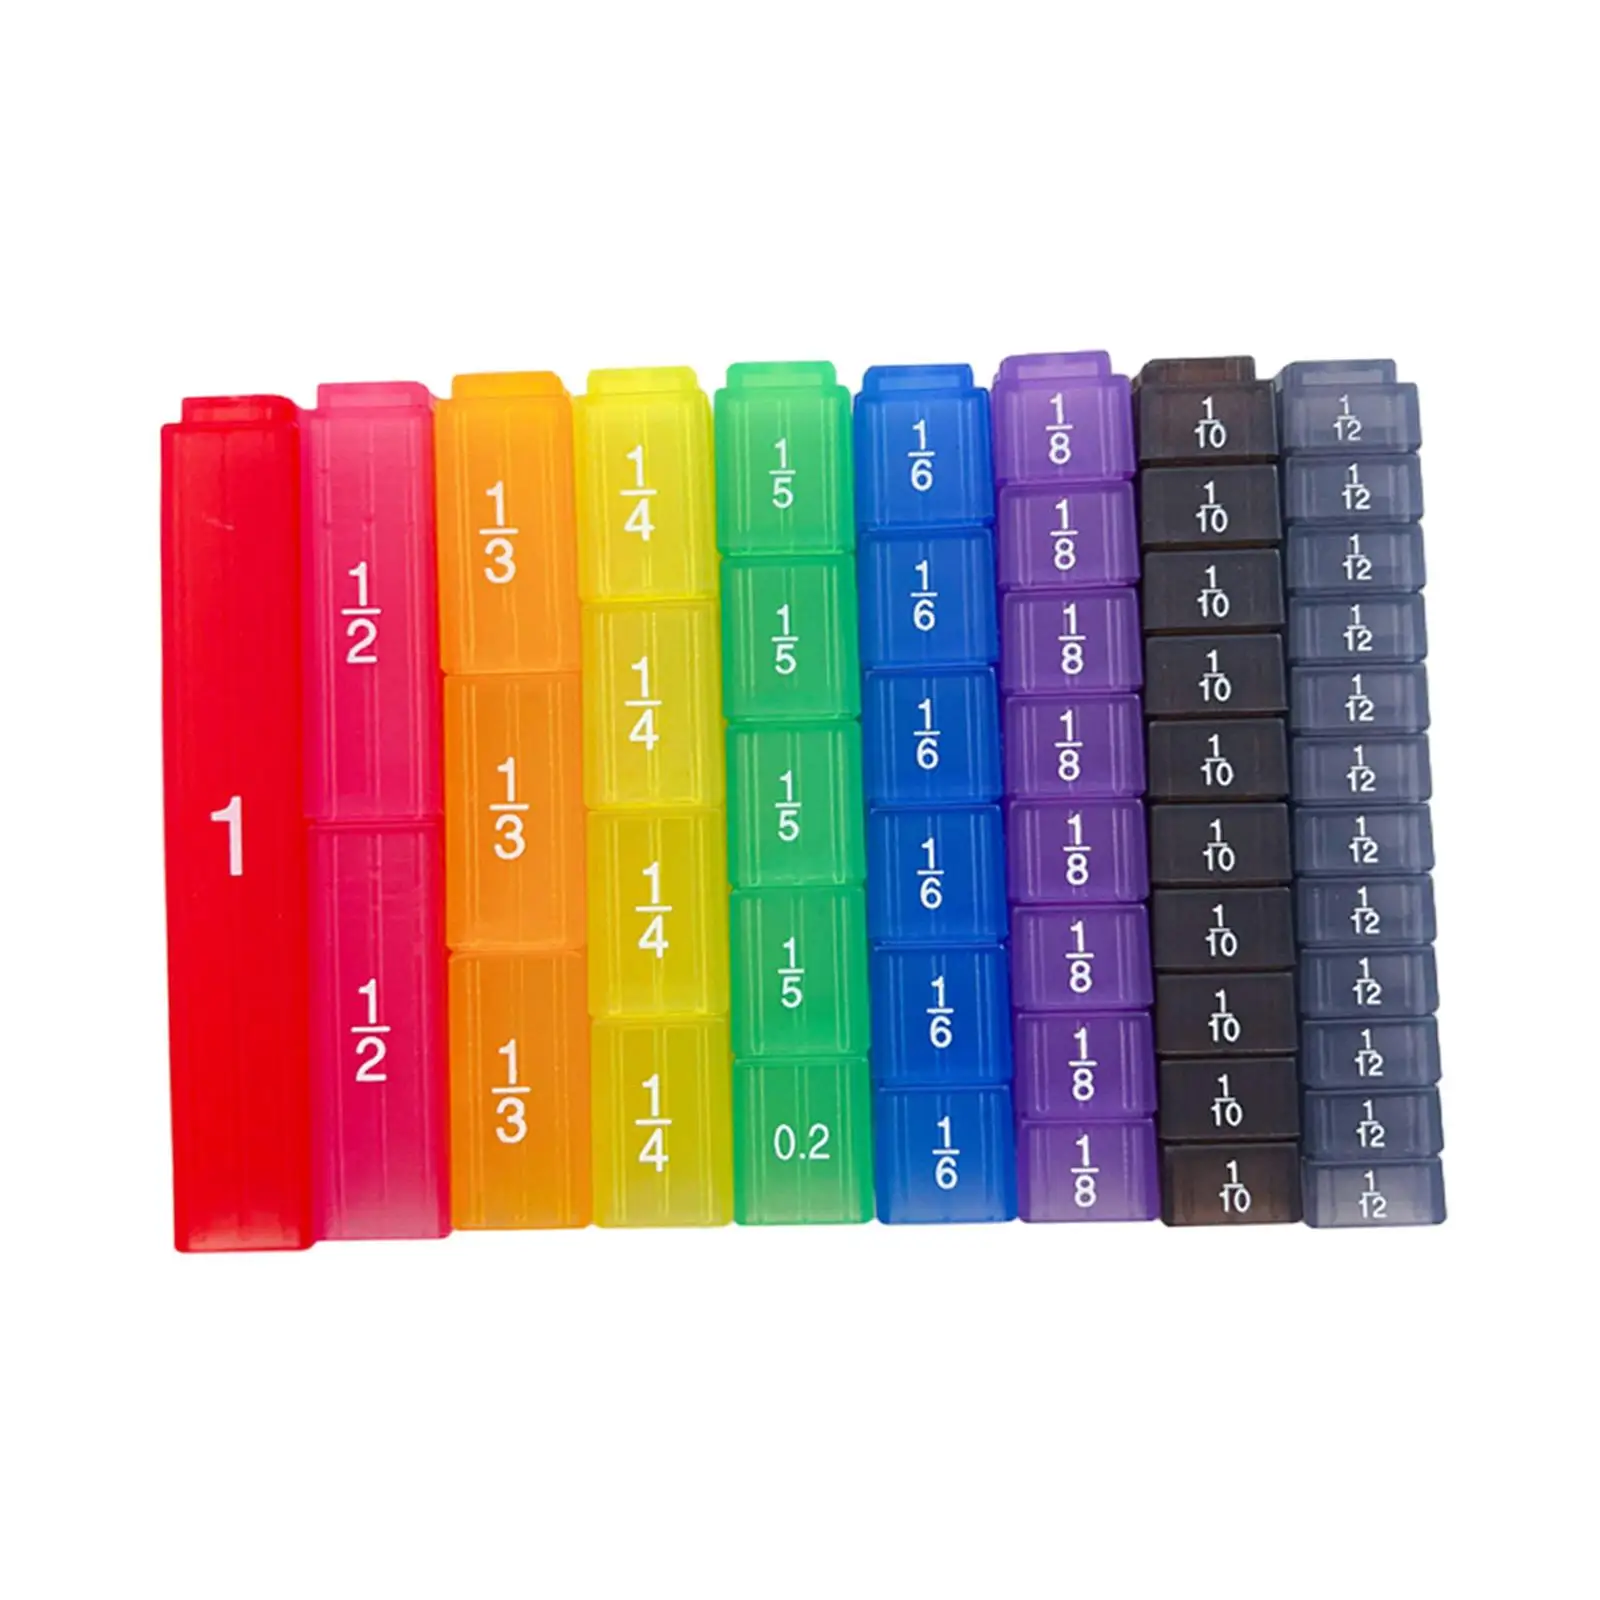 Fraction Cube Math Manipulatives Colorful Teaching Material for Kids